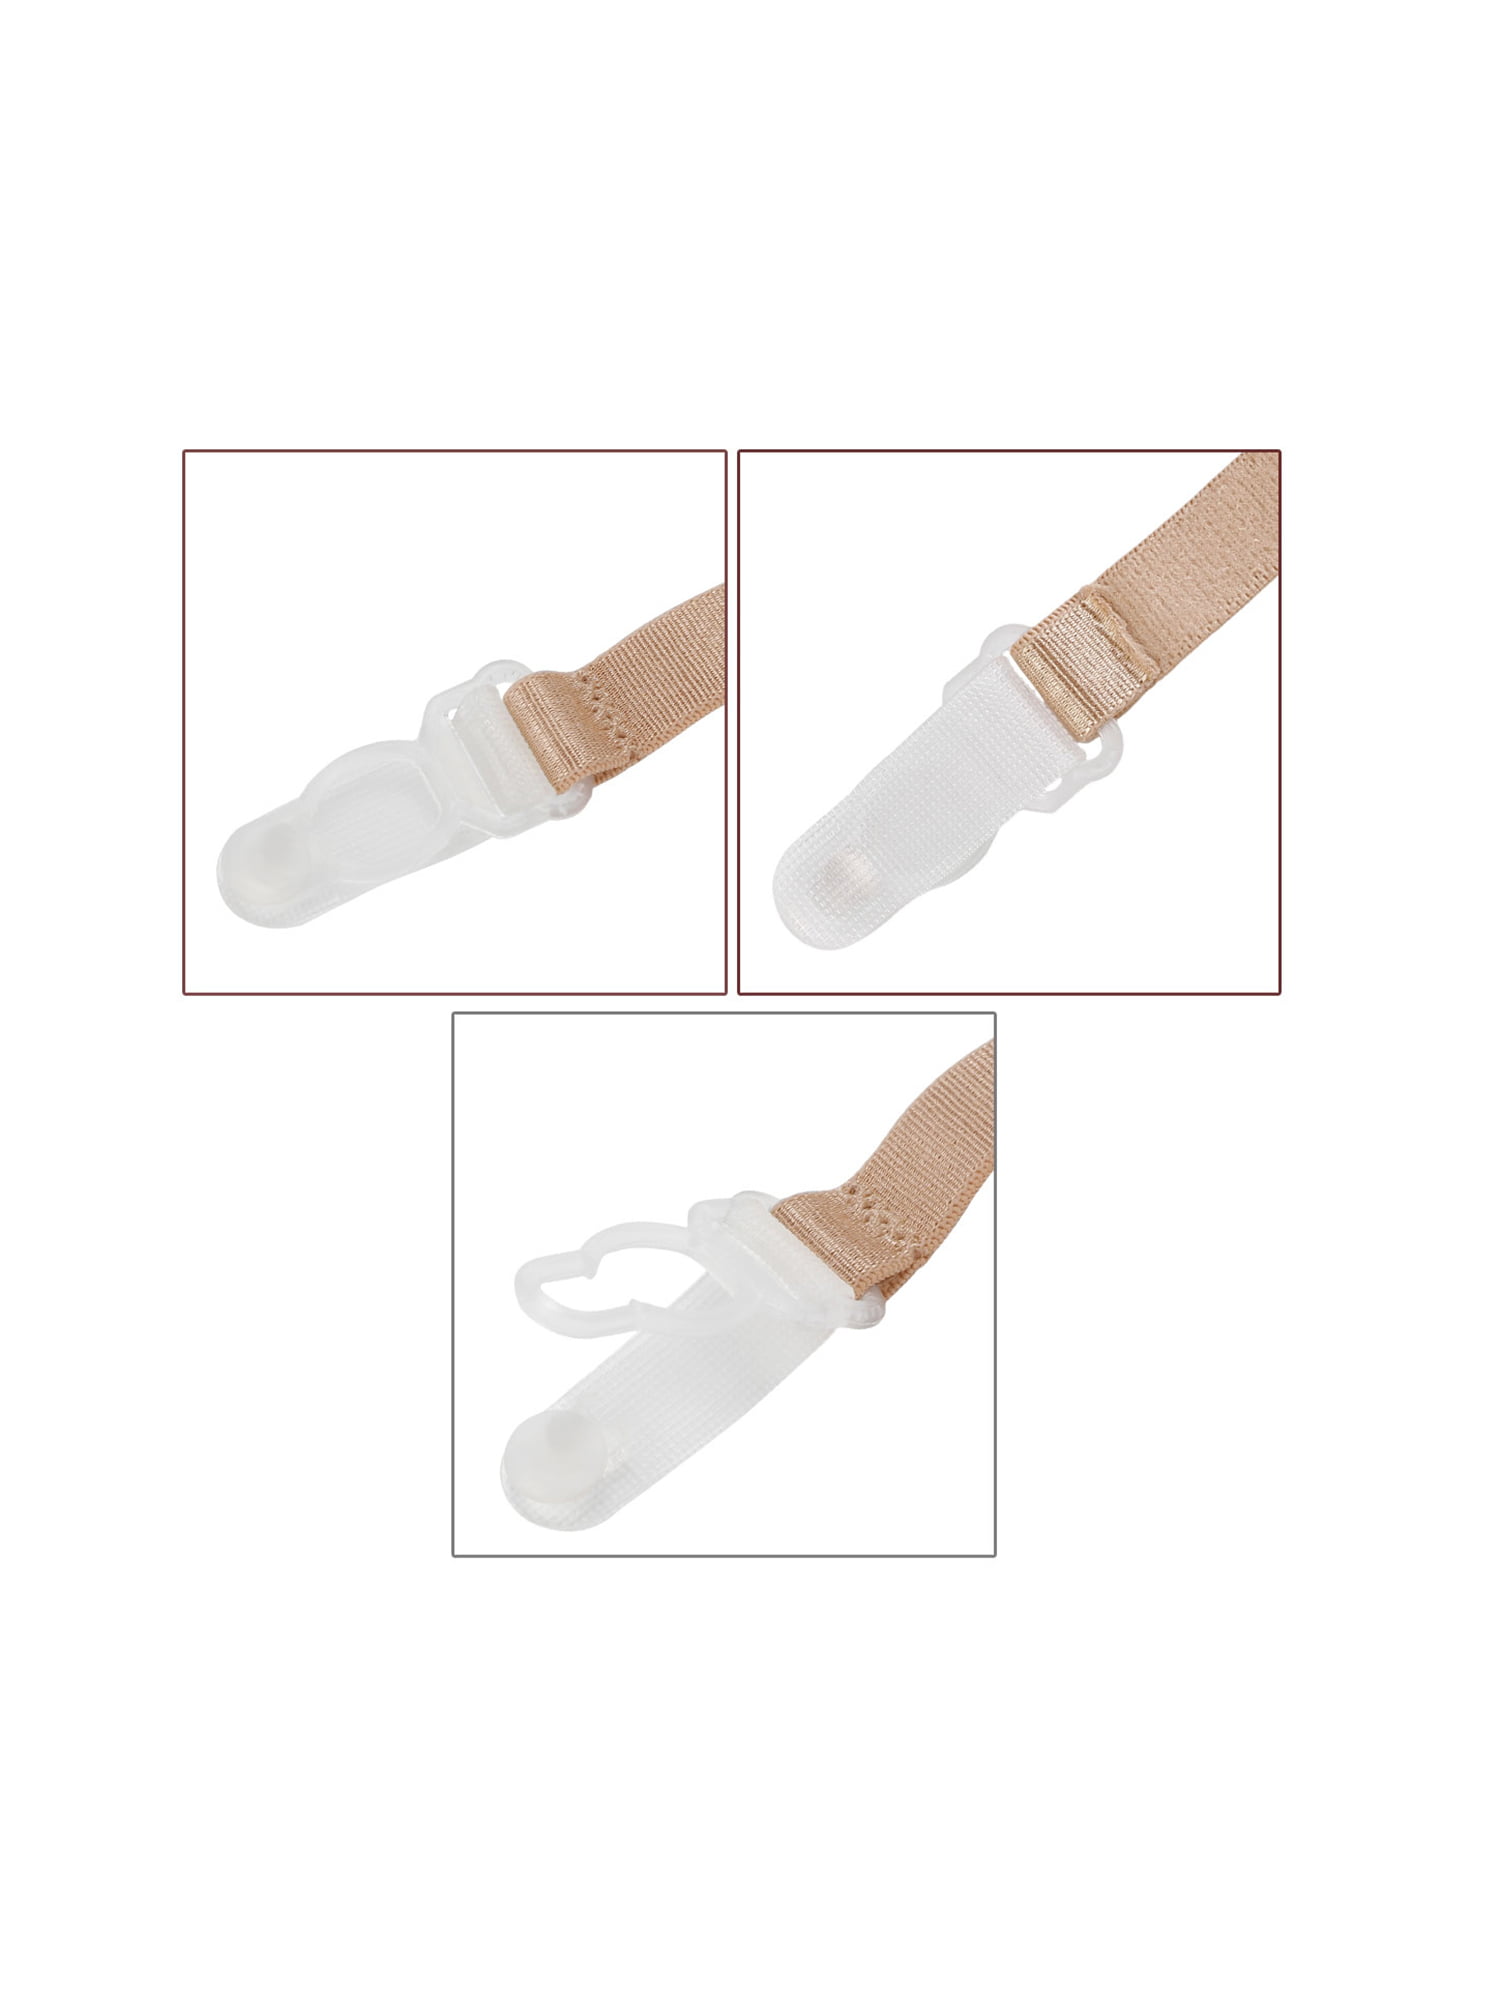 LUCSIS Bra strap holders non slip elastic banding, bra strap clips for the  back, cross back convertors (11A (White, Clear, Beige, Black)) at   Women's Clothing store